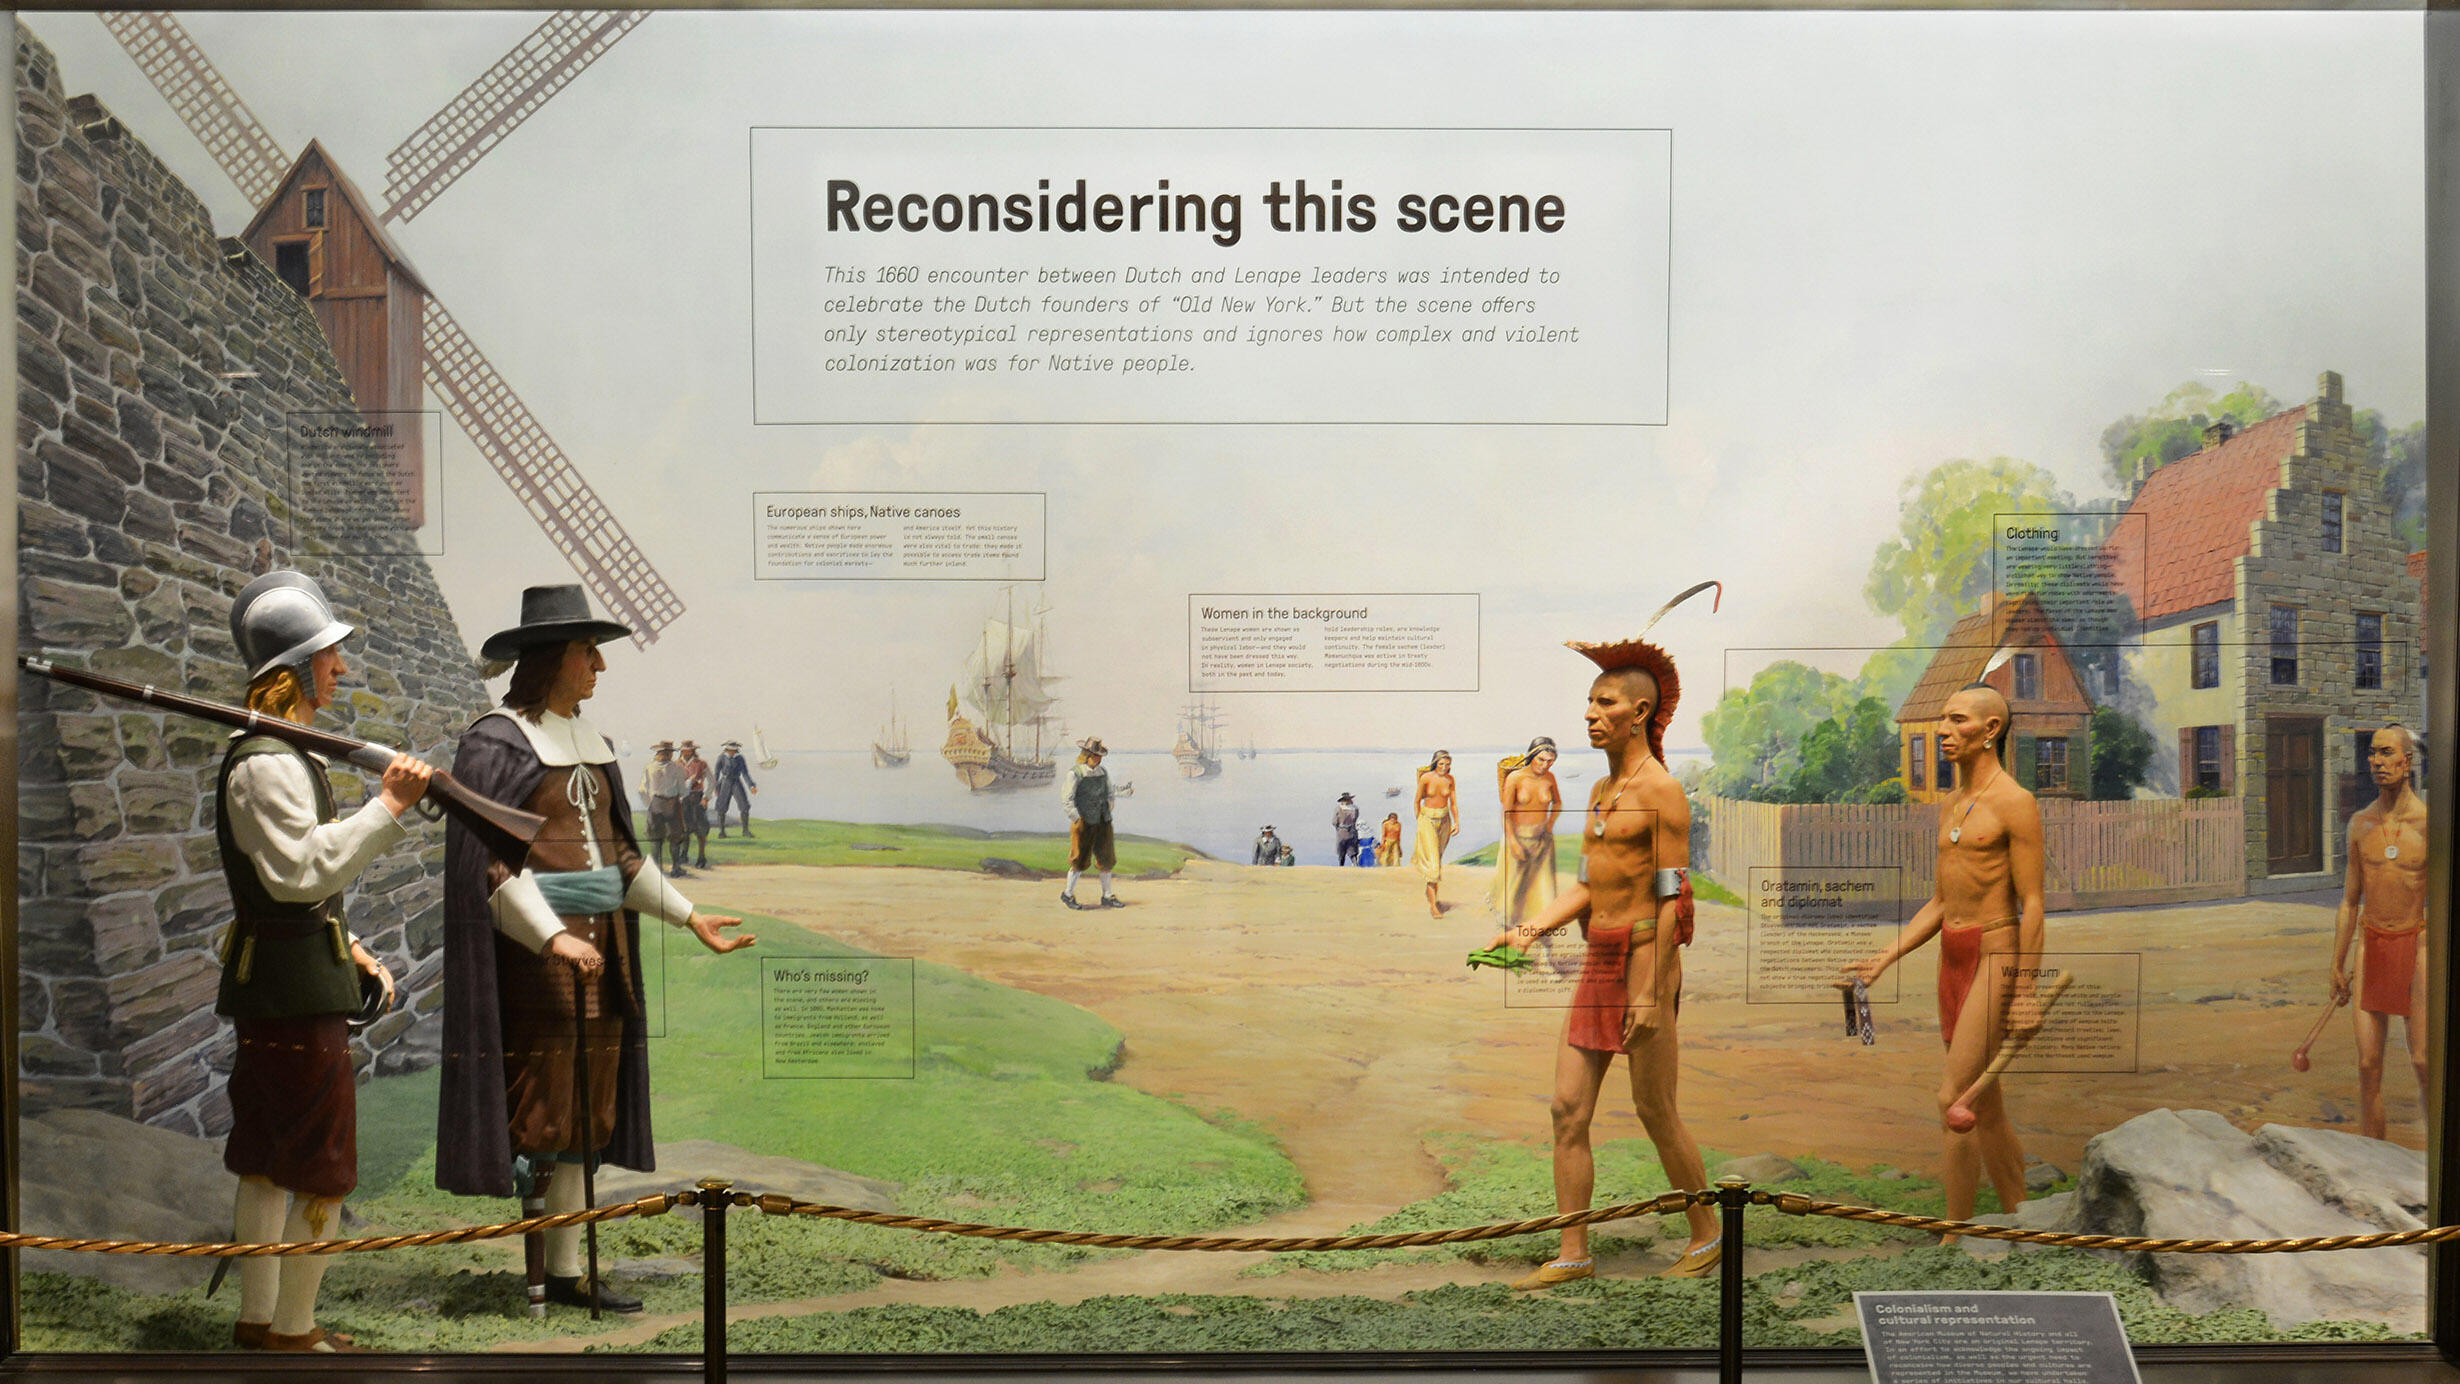 Text labels on the glass of the Old New York diorama, a scene between the colonial Dutch and the Lenape, adds context and highlights misrepresentation